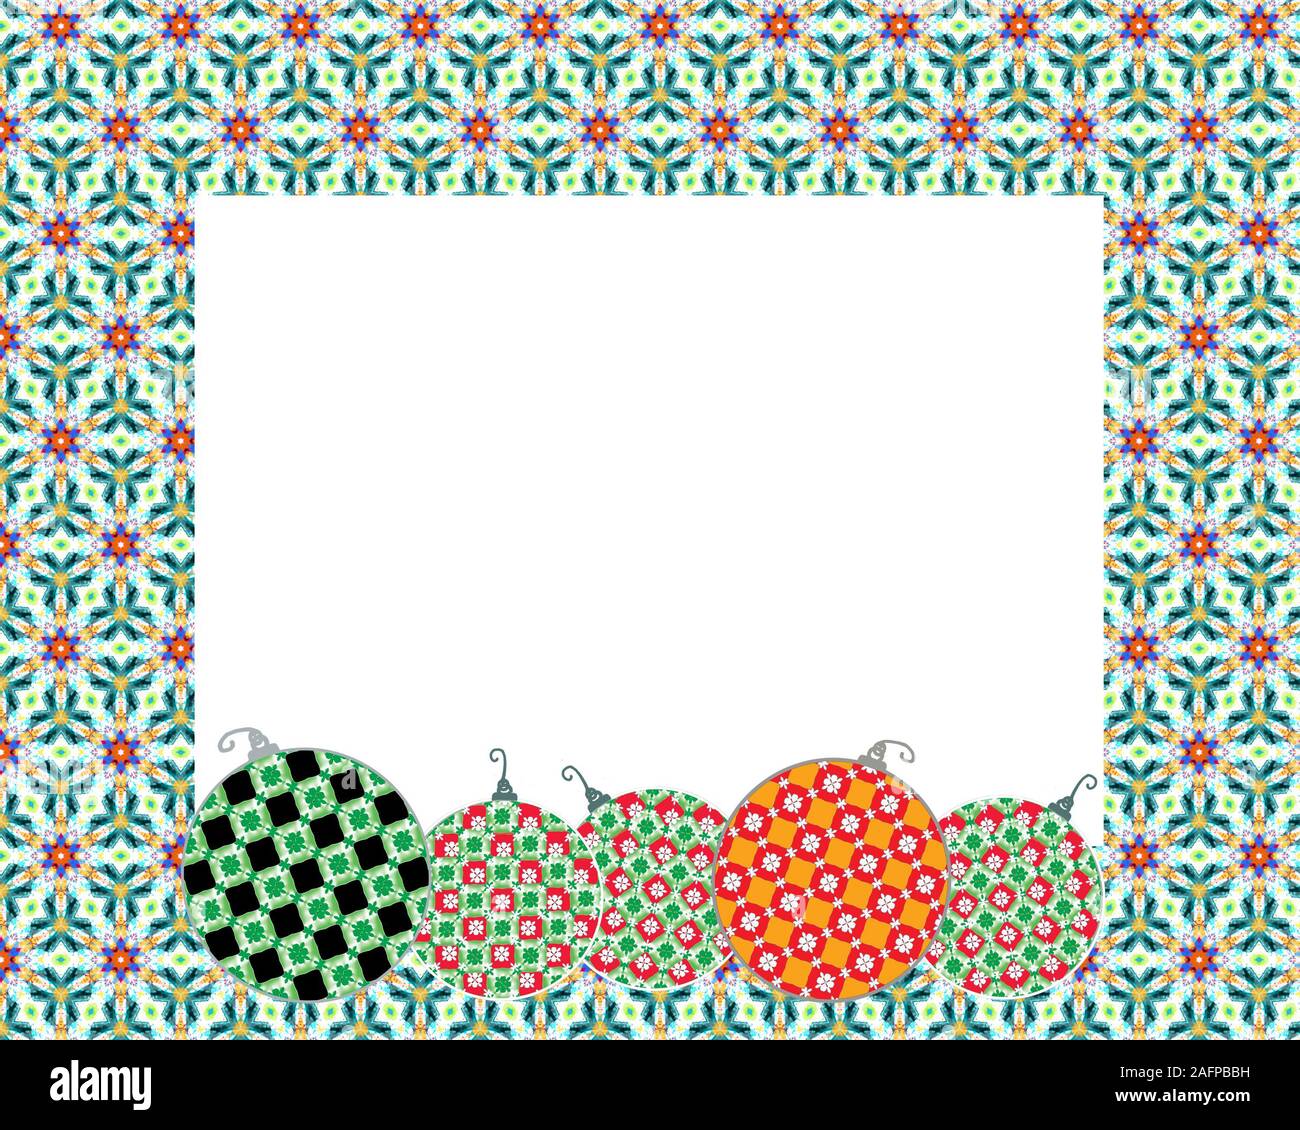 Festive Christmas frame with colorful pattern and decorated ornaments, graphic element template blank for holiday background or greeting card design Stock Photo